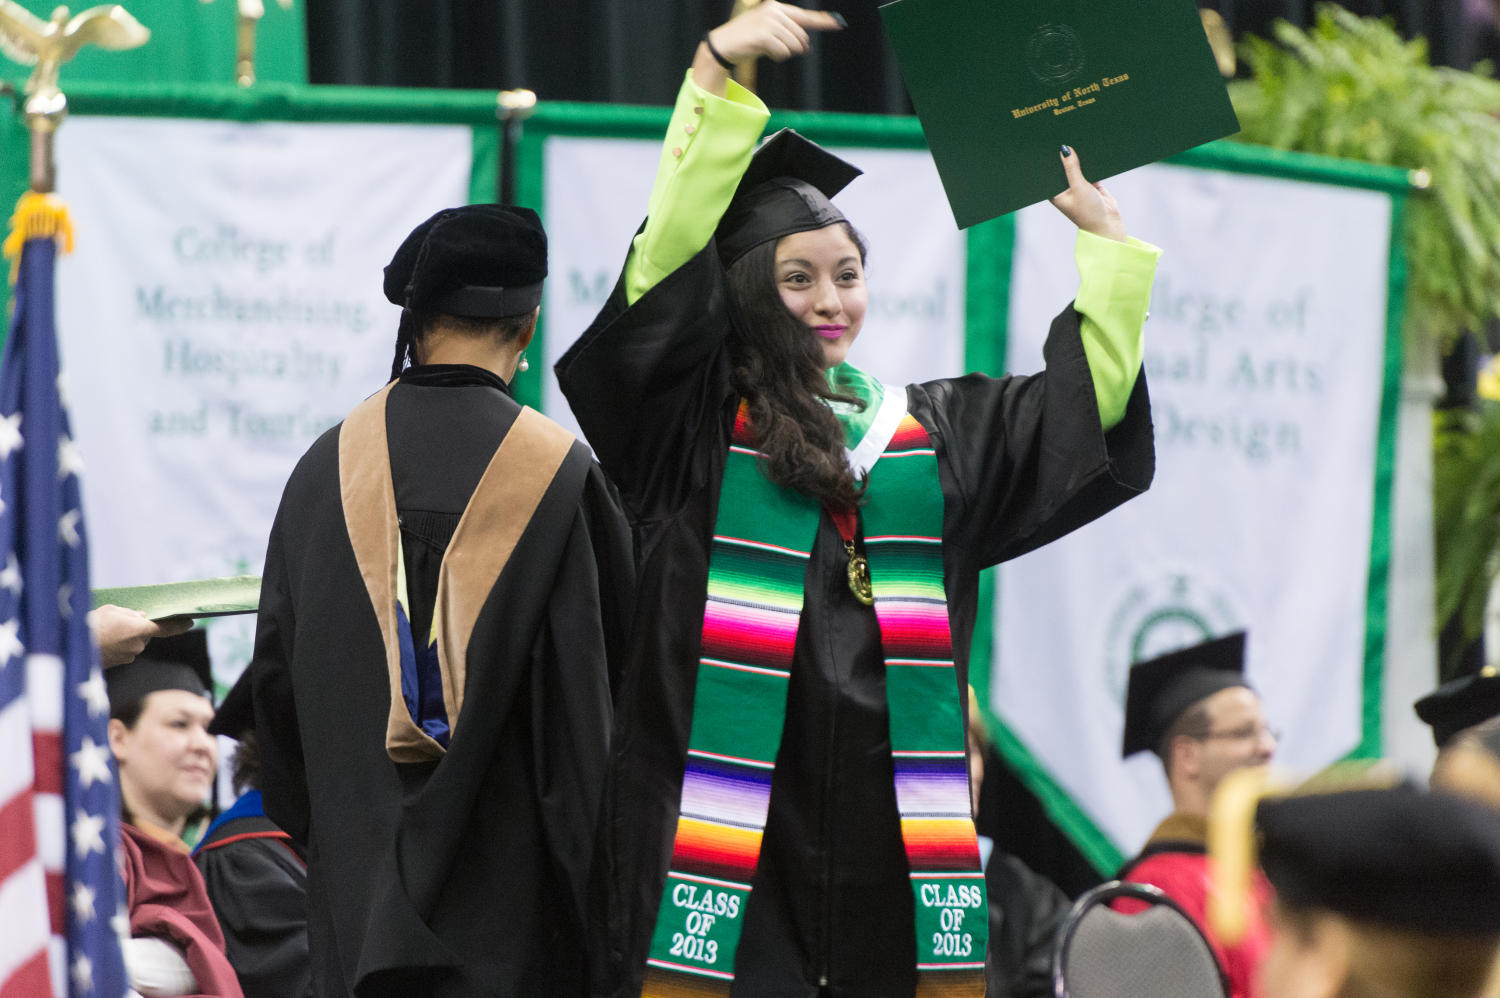 [Student holding diploma] UNT Digital Library